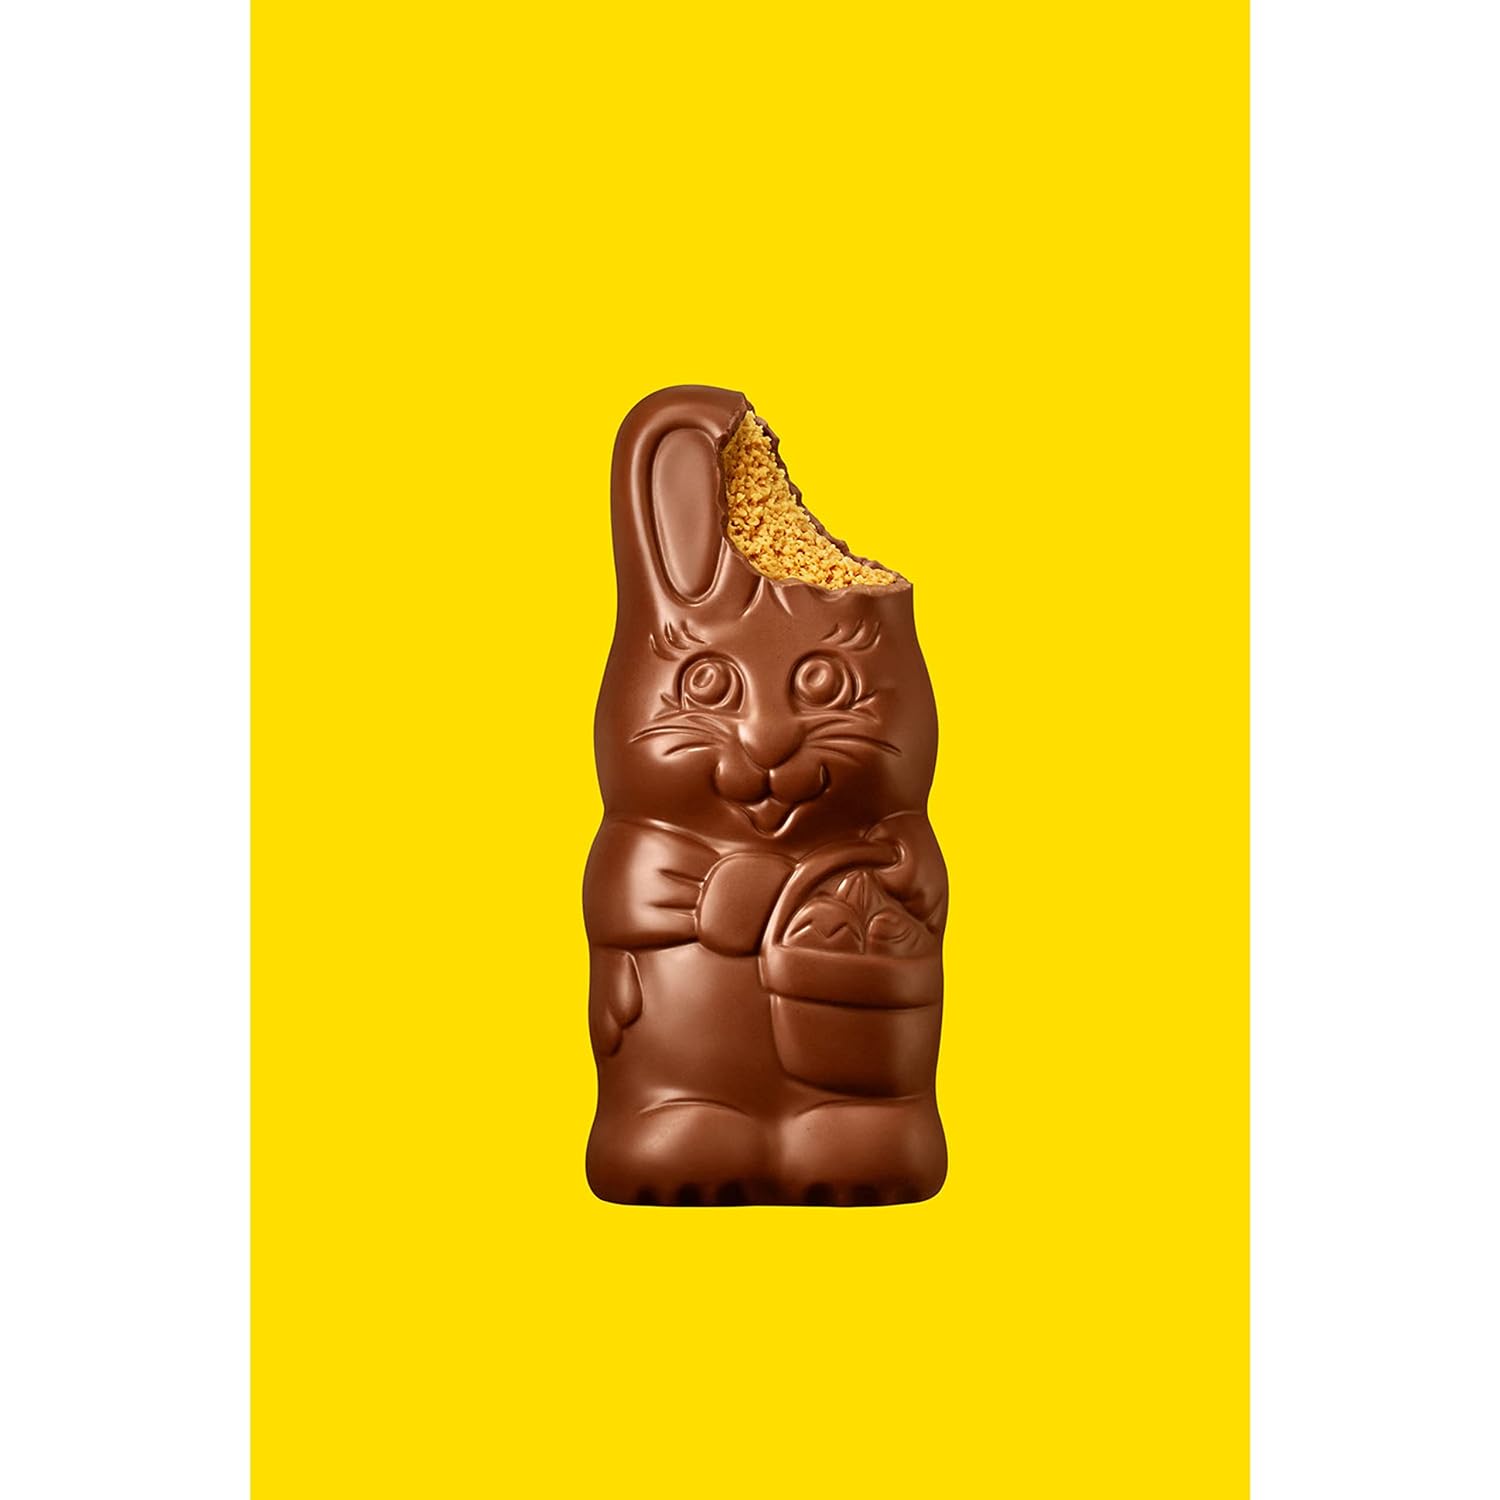 REESE'S BUNNY Milk Chocolate Peanut Butter, Easter Basket Easter Candy Gift Box, 1 lb